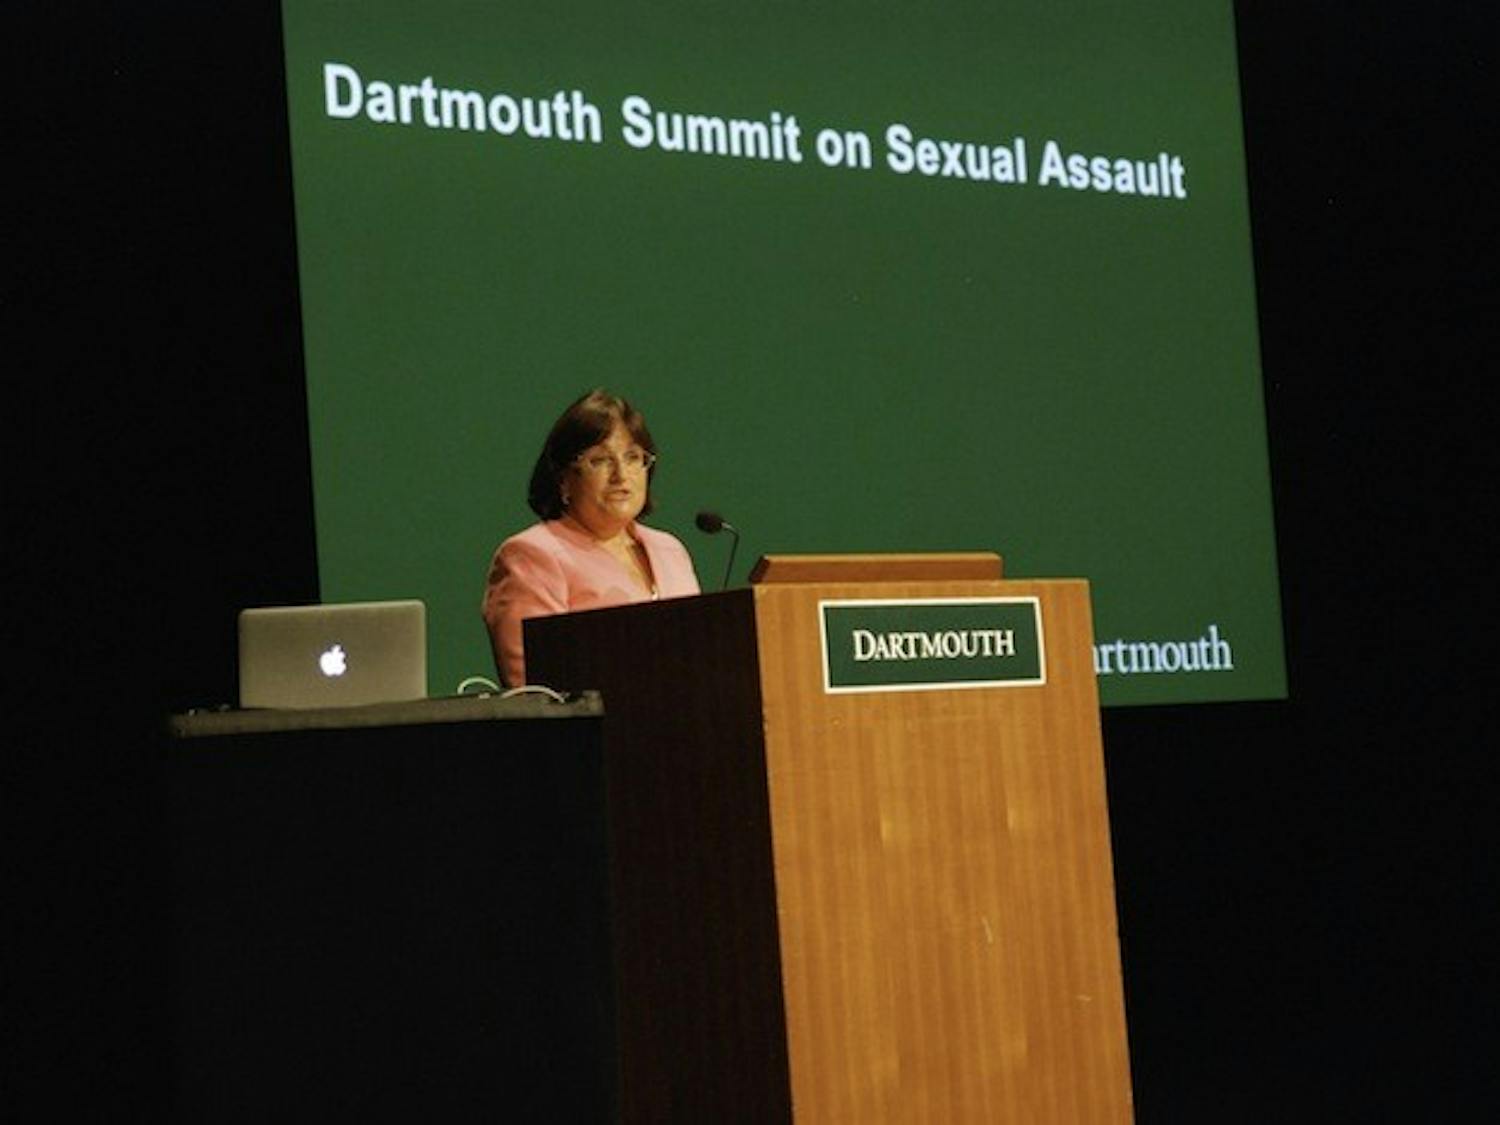 Dartmouth hosts visitors for its first Summit on Sexual Assault